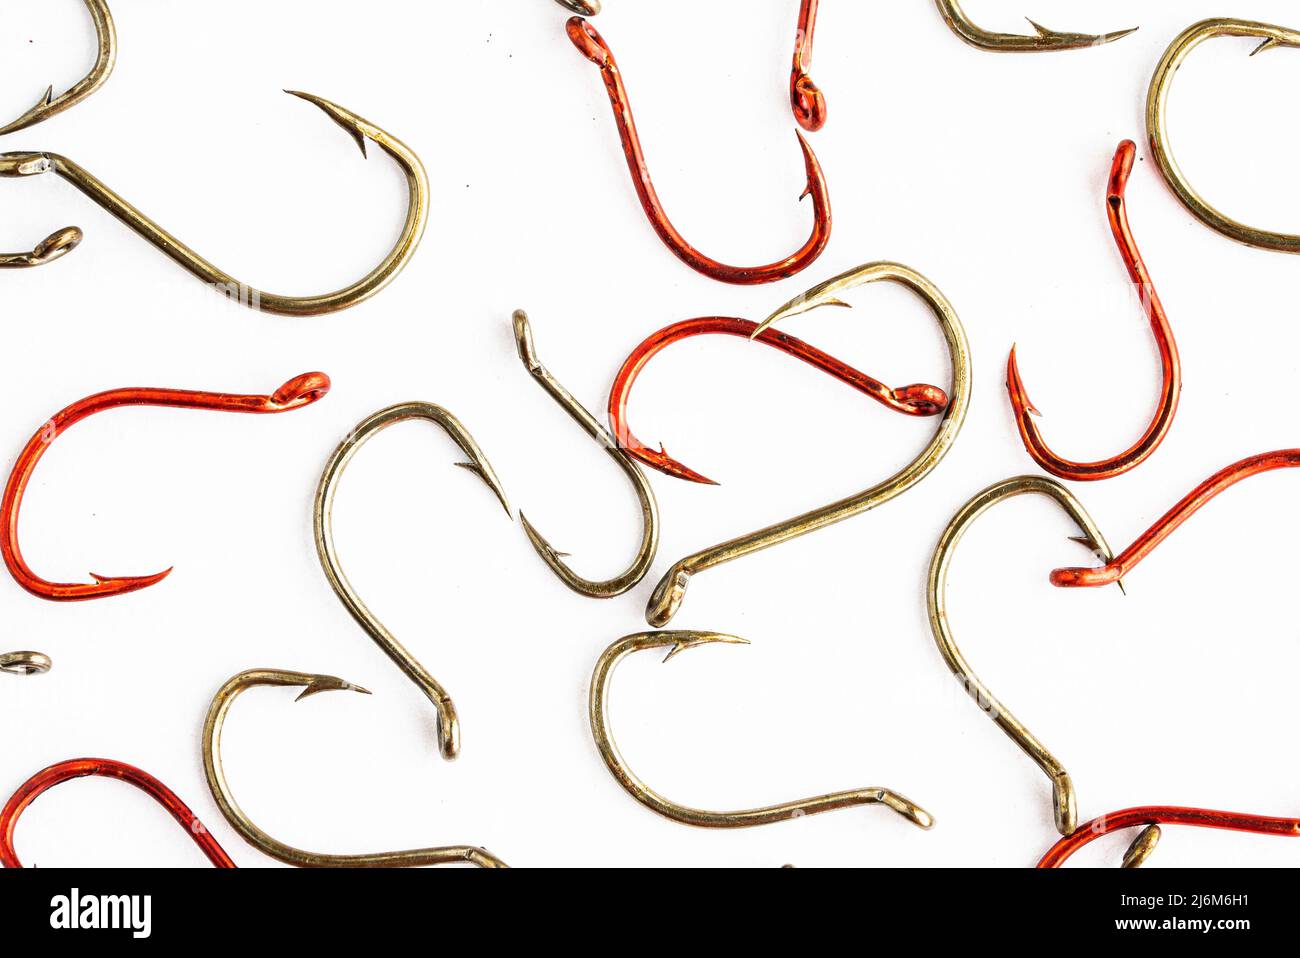 Close up fishing Cut Out Stock Images & Pictures - Alamy